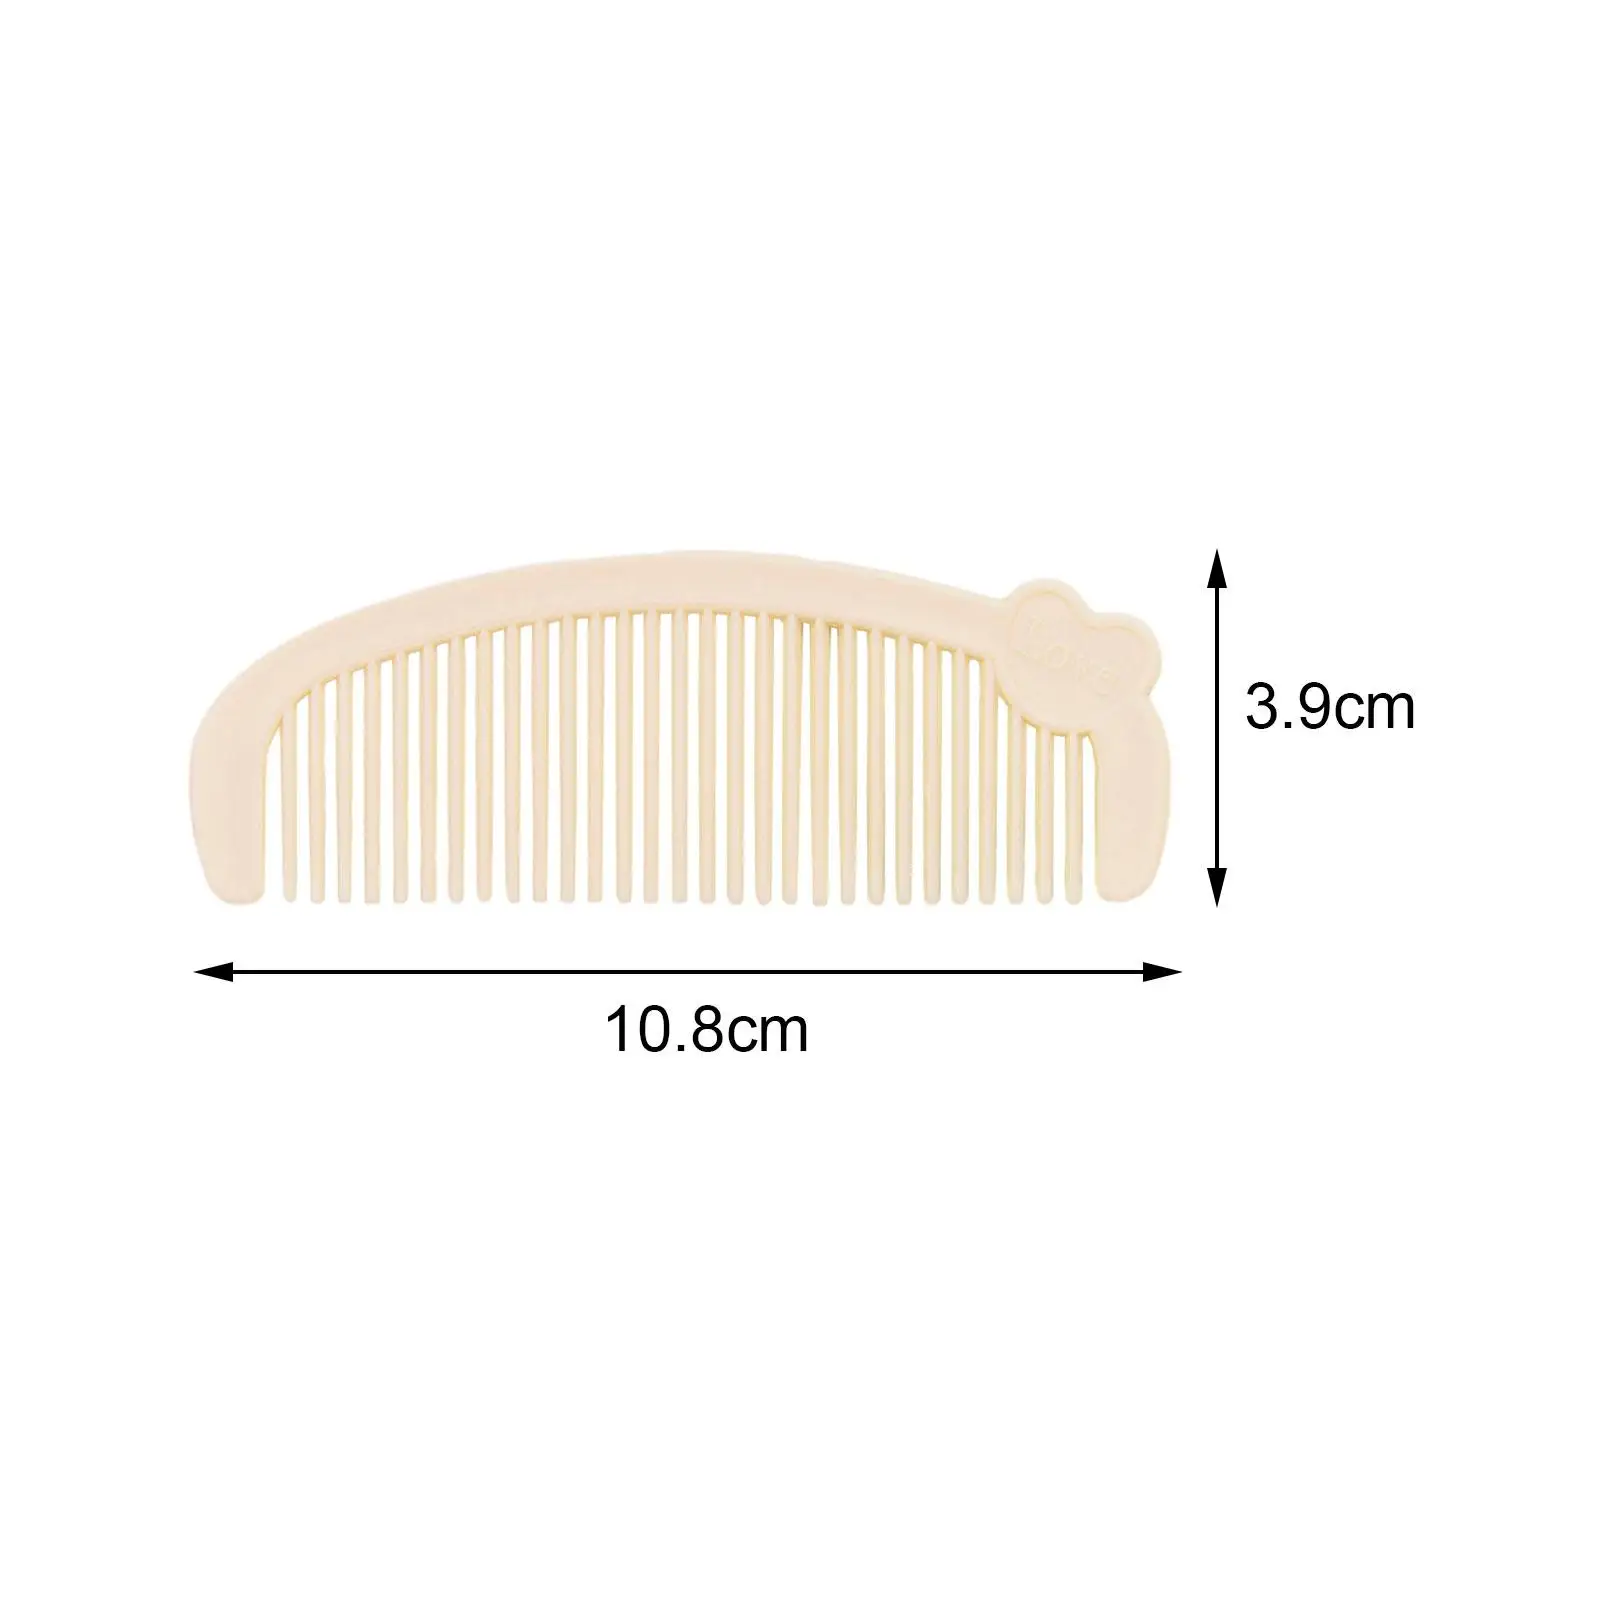 Girl Hair Comb Heart Shaped Cute Small Comb for Salon Home Hairdressing Tool